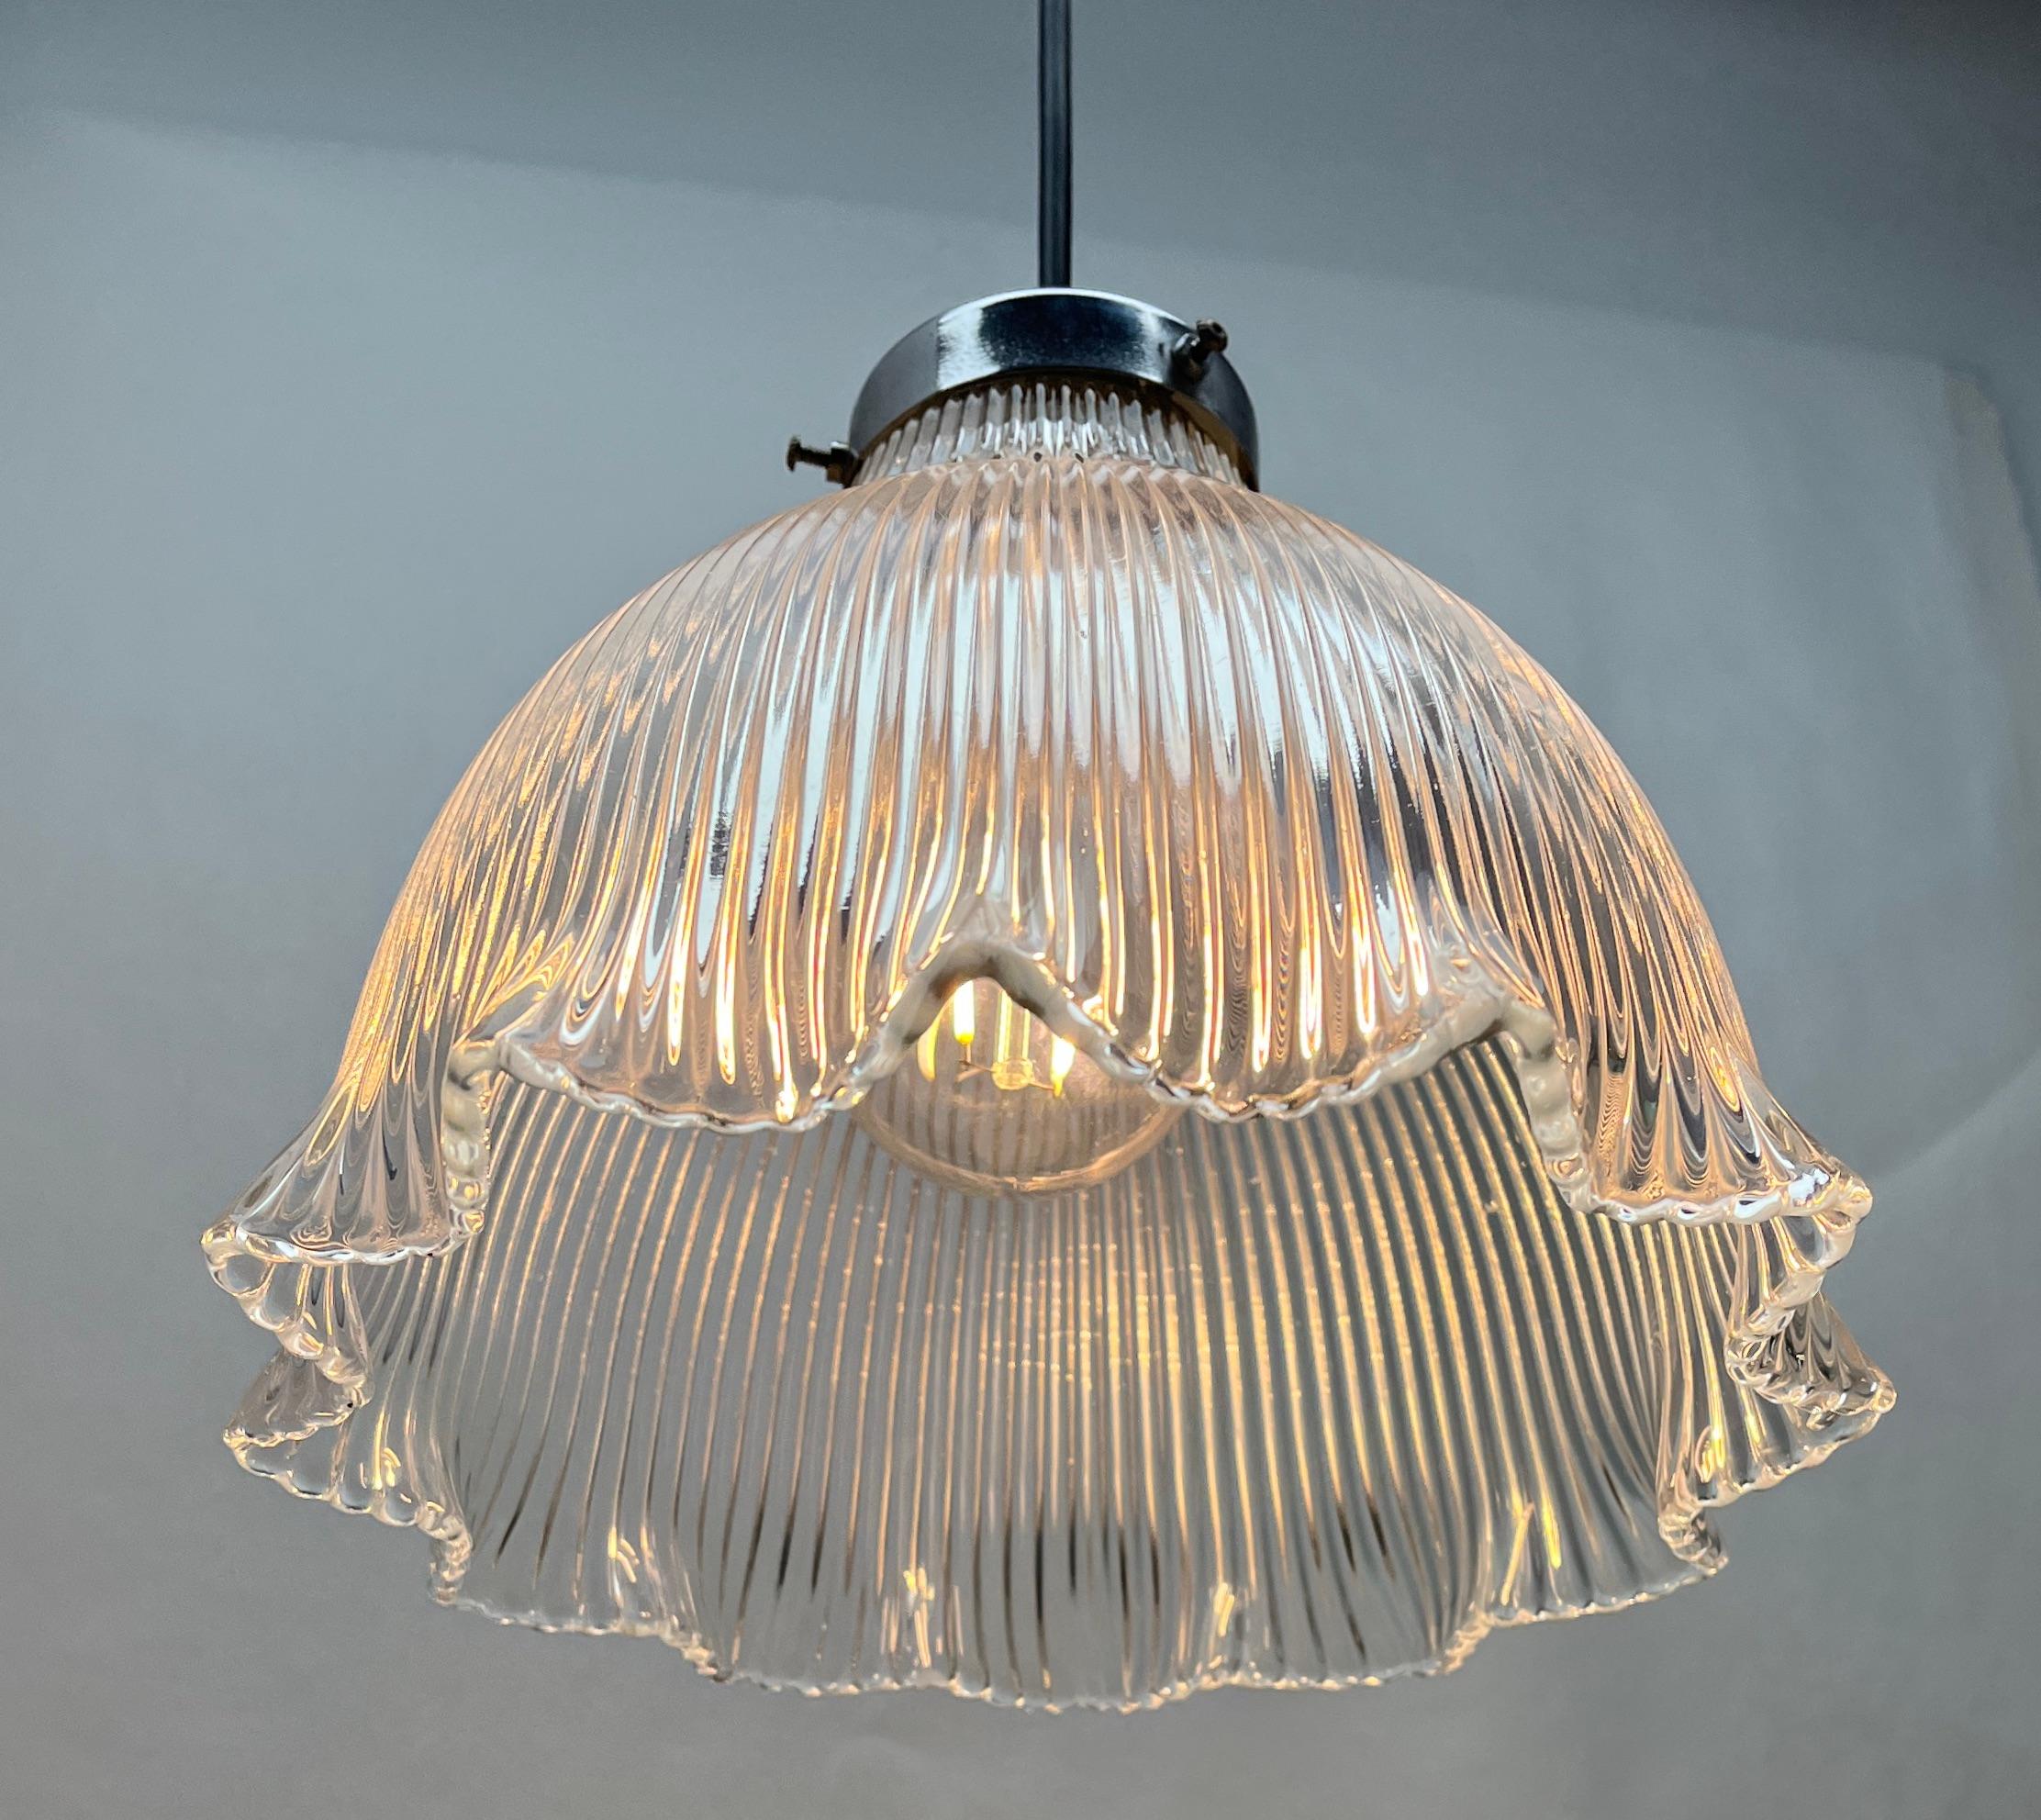 Pendant Lamp with a Corrugated Glass Shade, 1950s, Netherlands For Sale 2